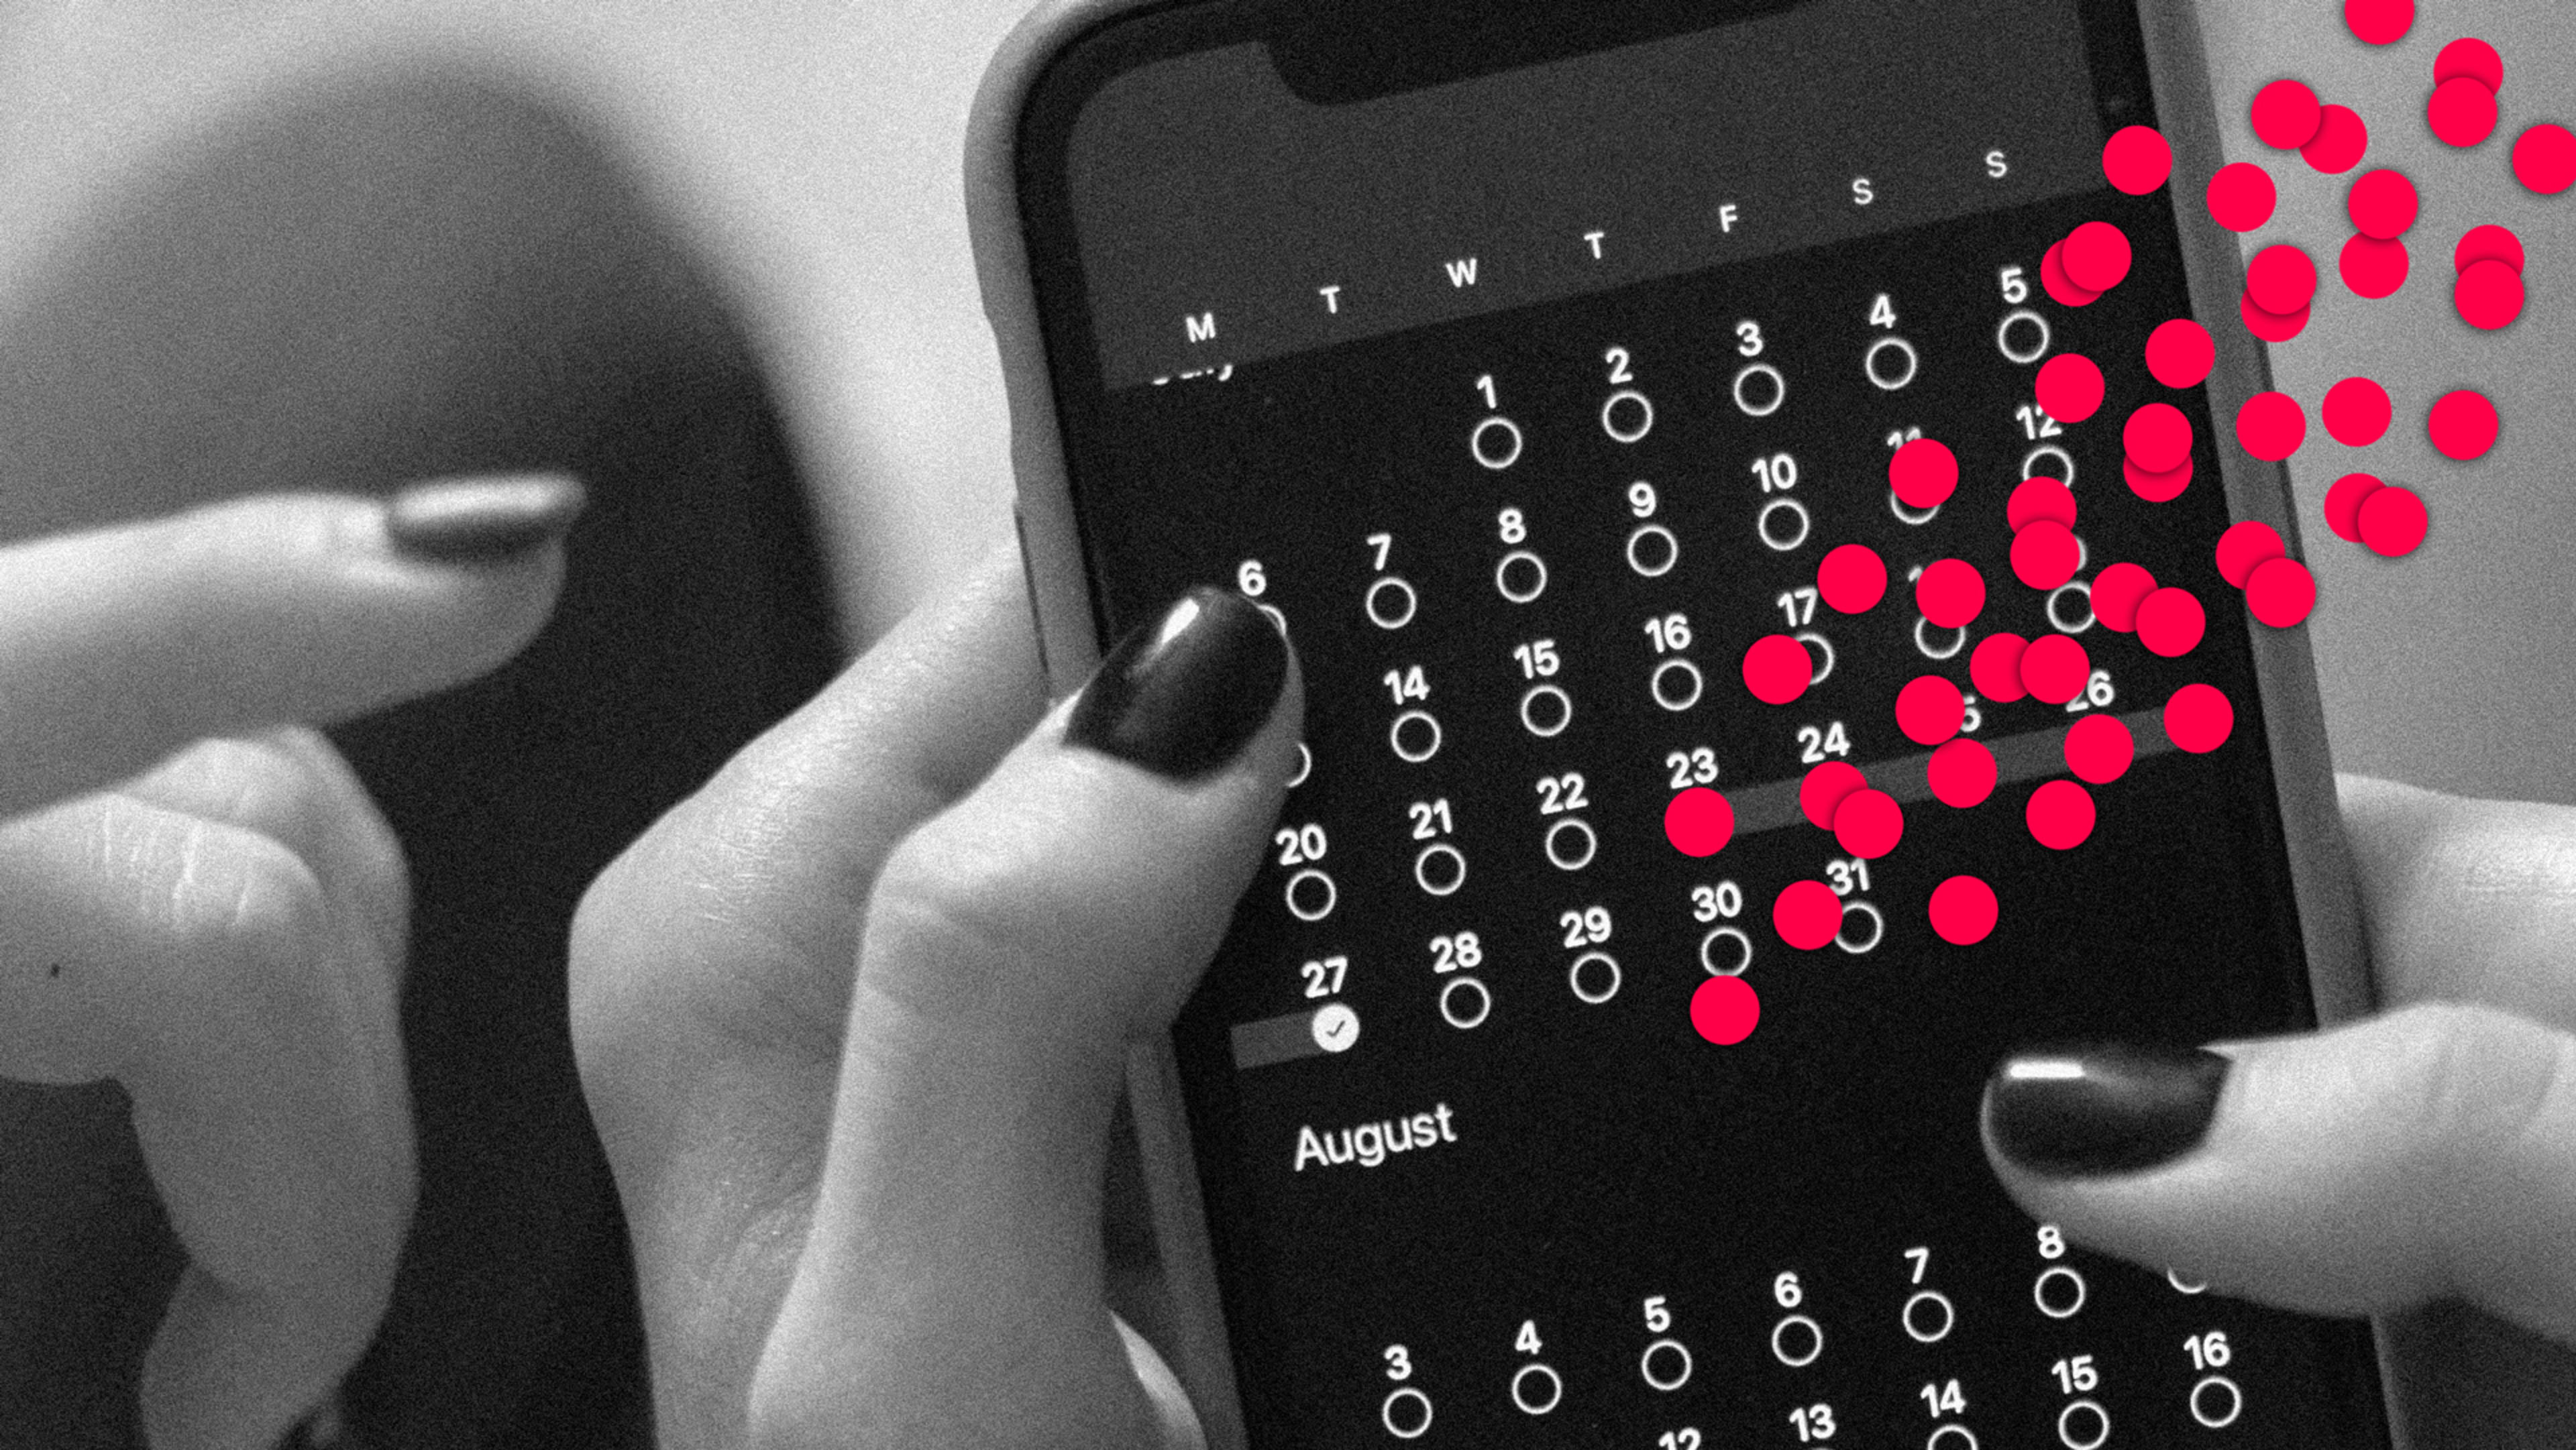 No, submitting junk data to period tracking apps won’t protect reproductive privacy